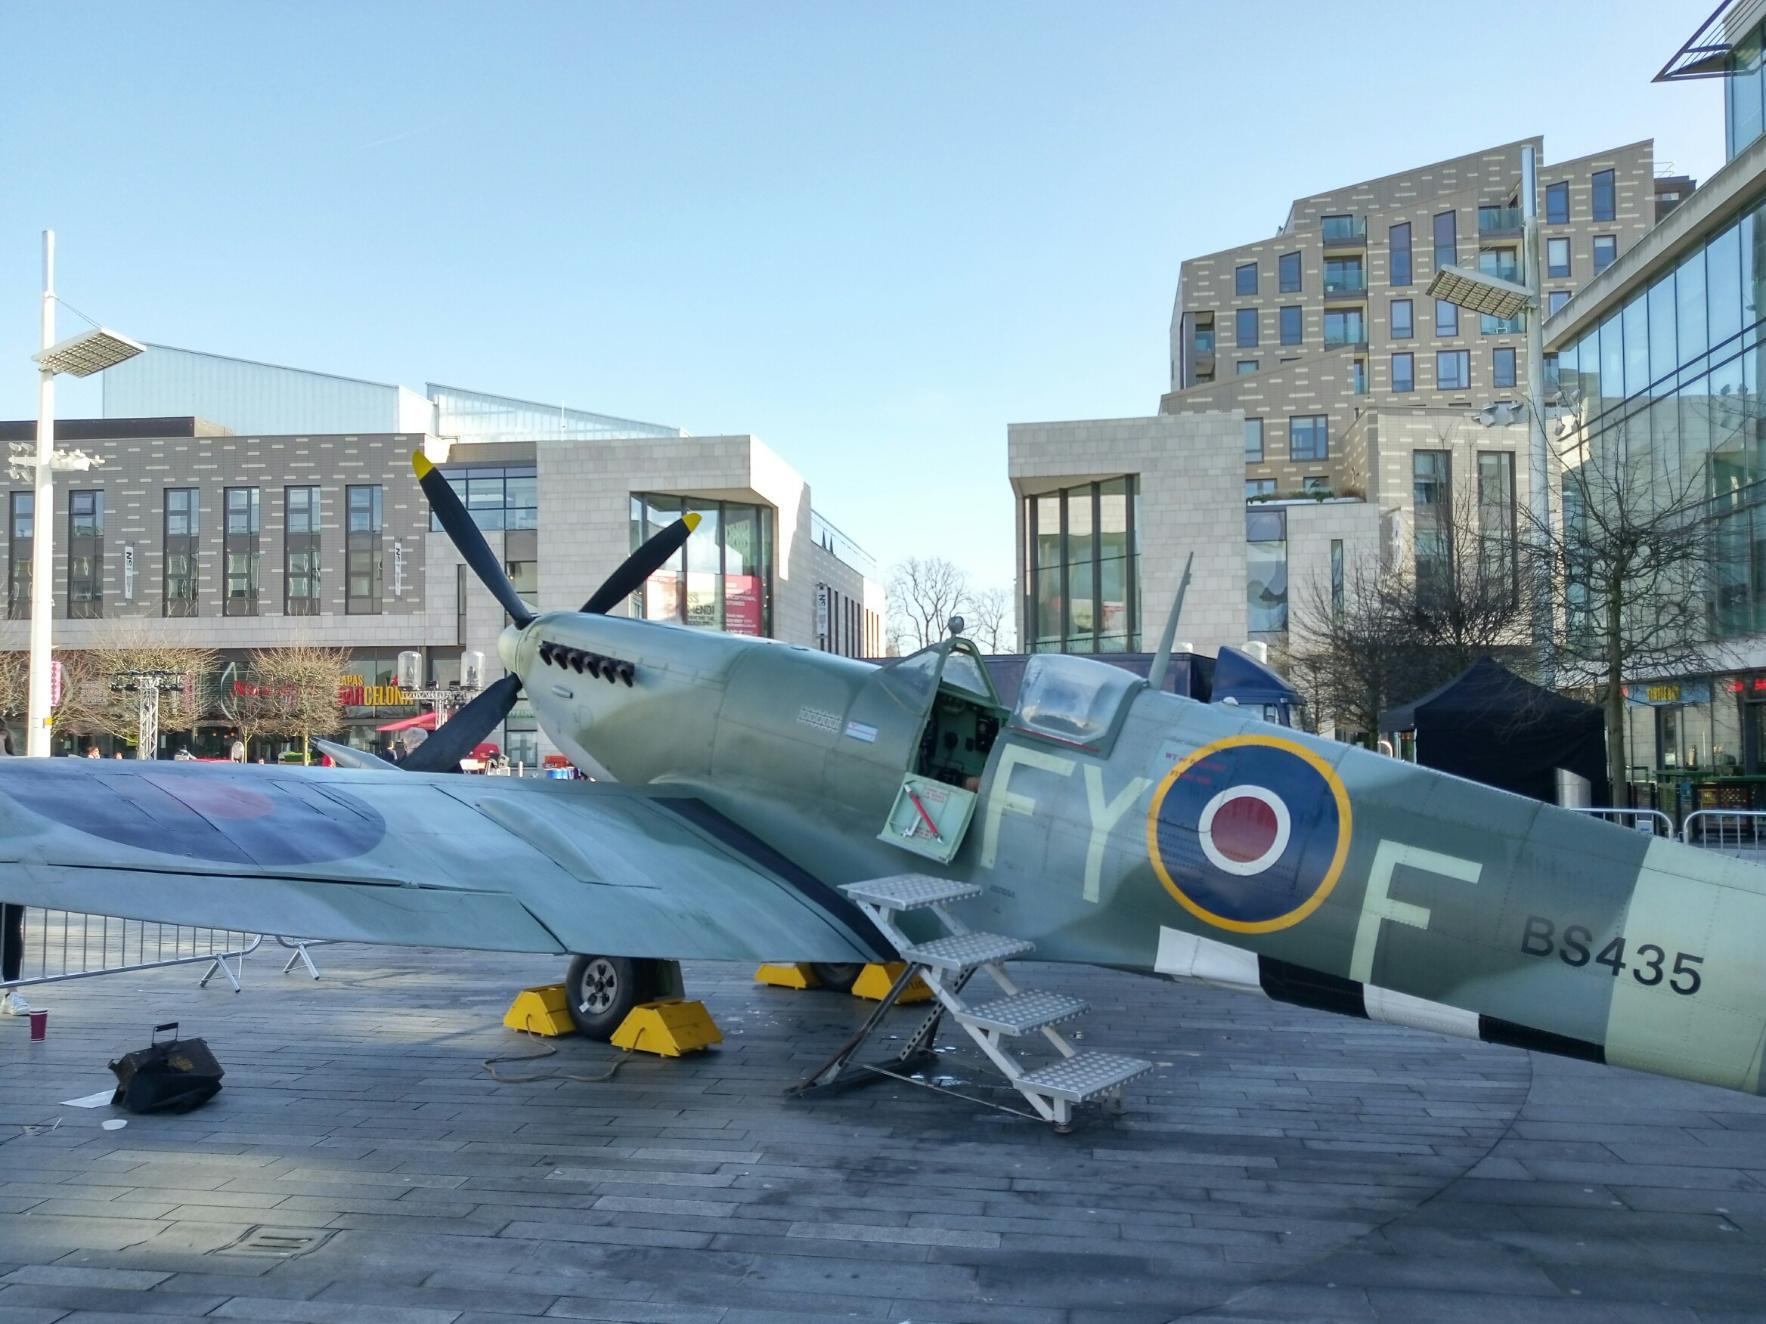 Spitfire on display in Guildhall Square